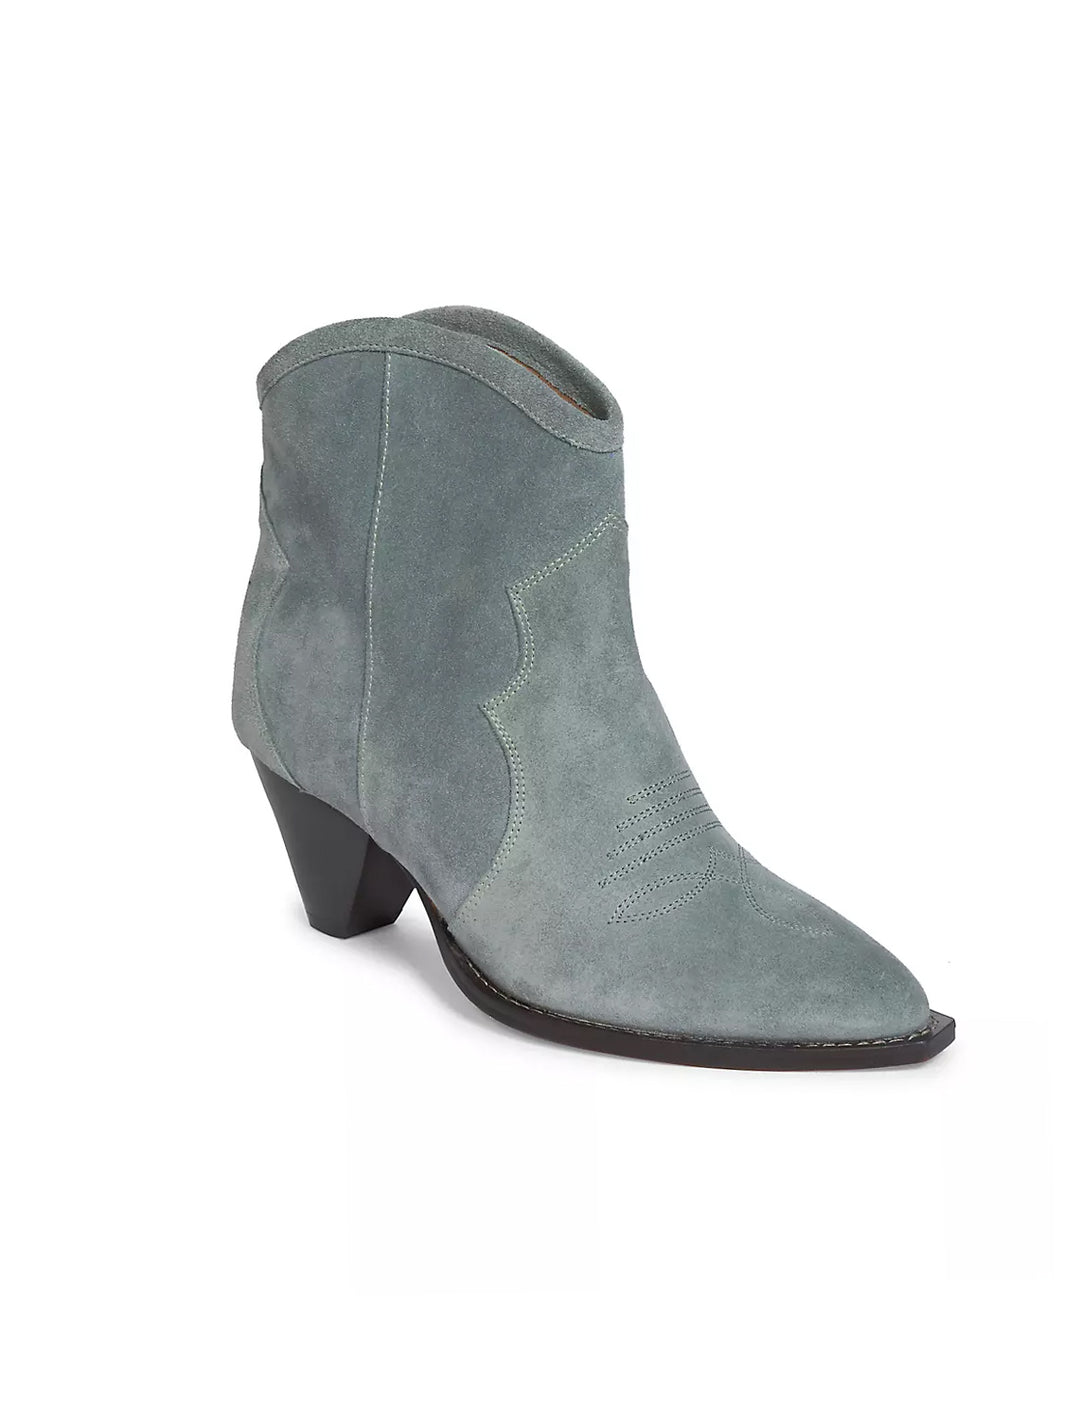 Front angle view of Isabel Marant Étoile's Darizo Boot in Sea Green.